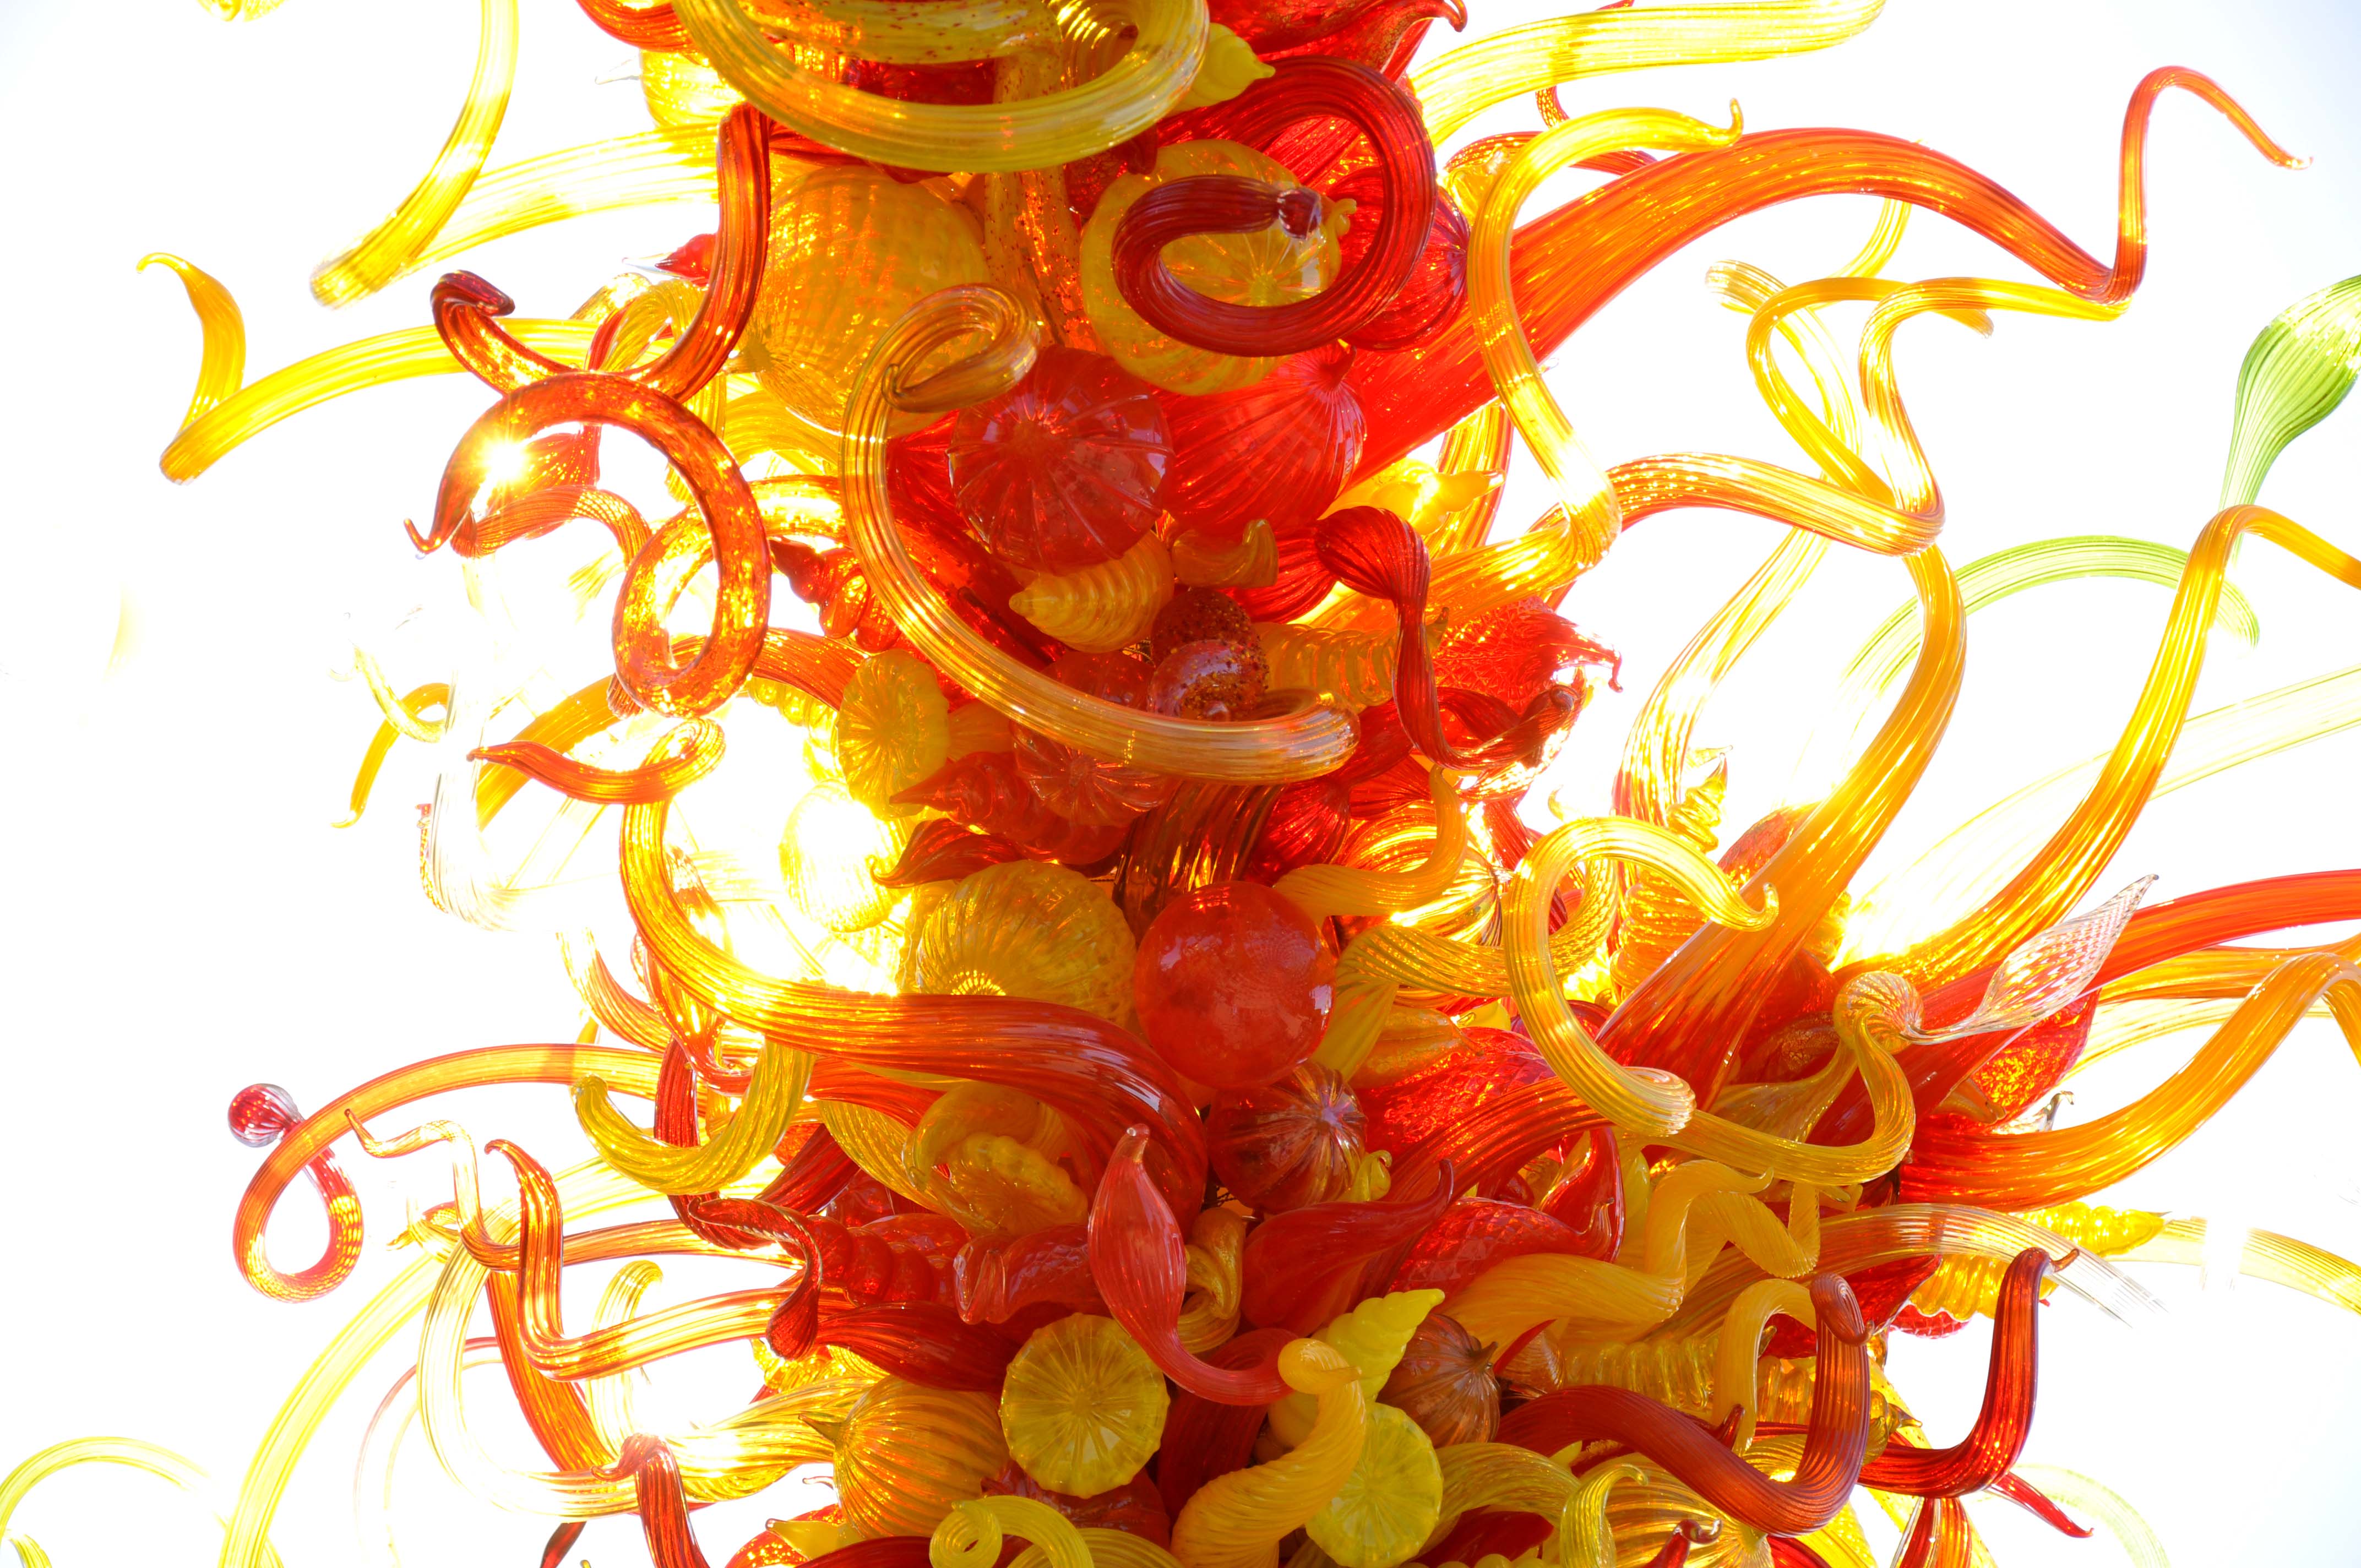 2014-phx-chihuly-no-1